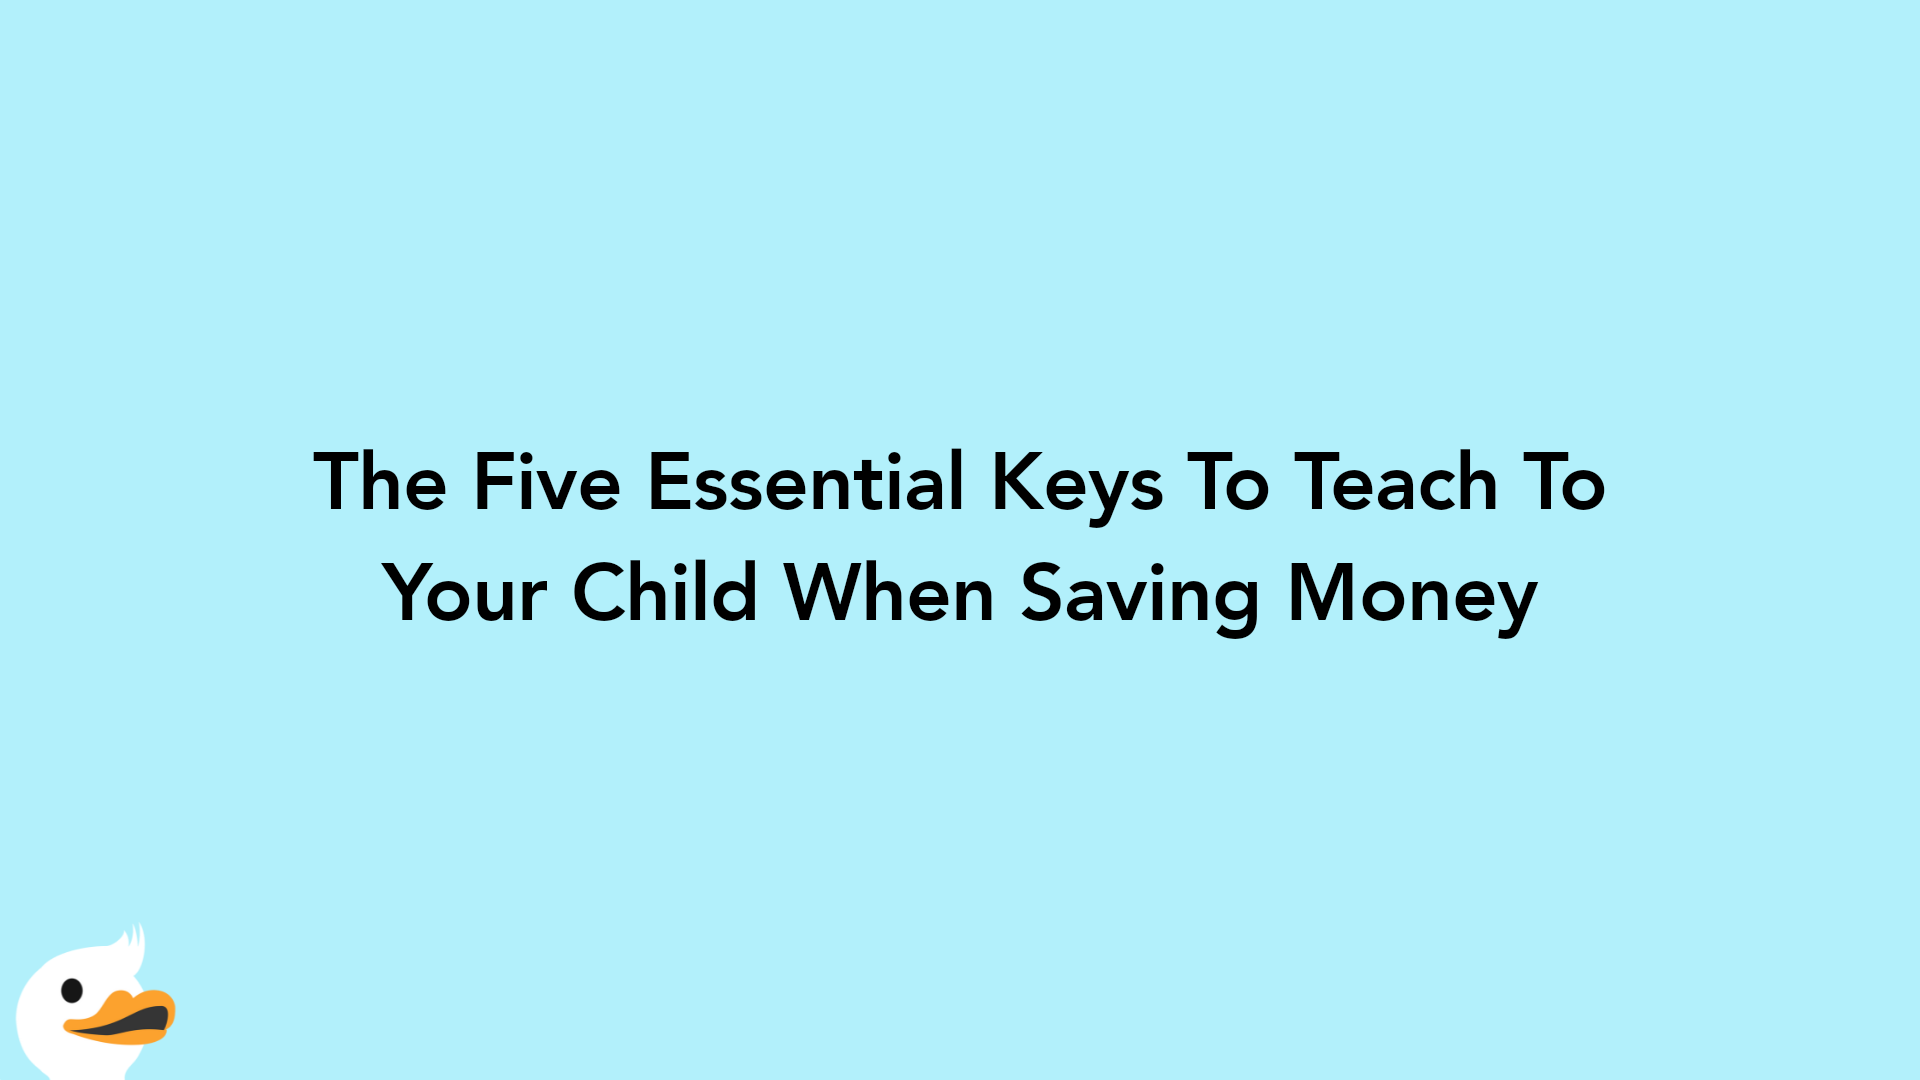 The Five Essential Keys To Teach To Your Child When Saving Money